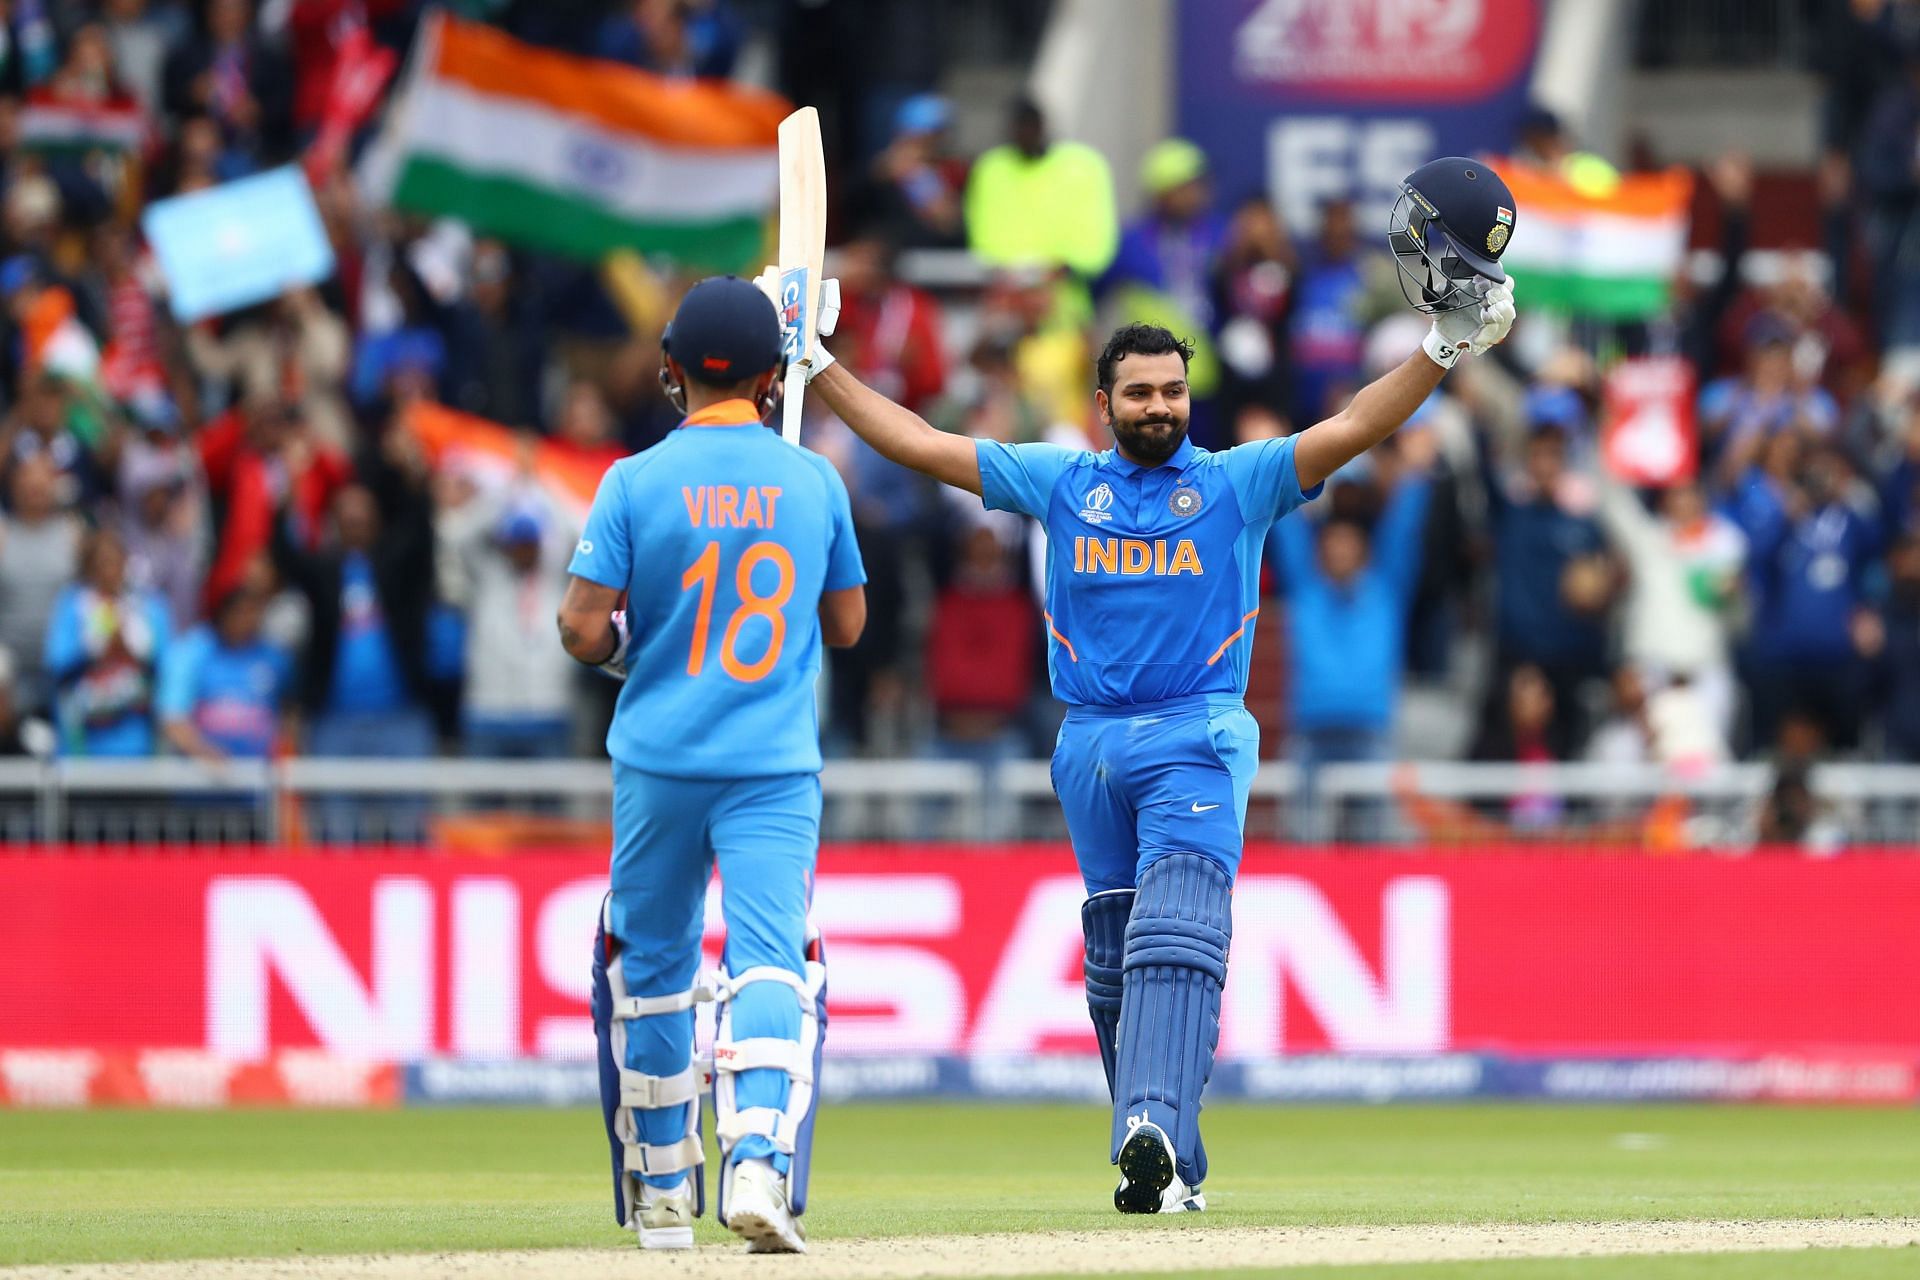 India v Pakistan - ICC Cricket World Cup 2019 [Getty Images]